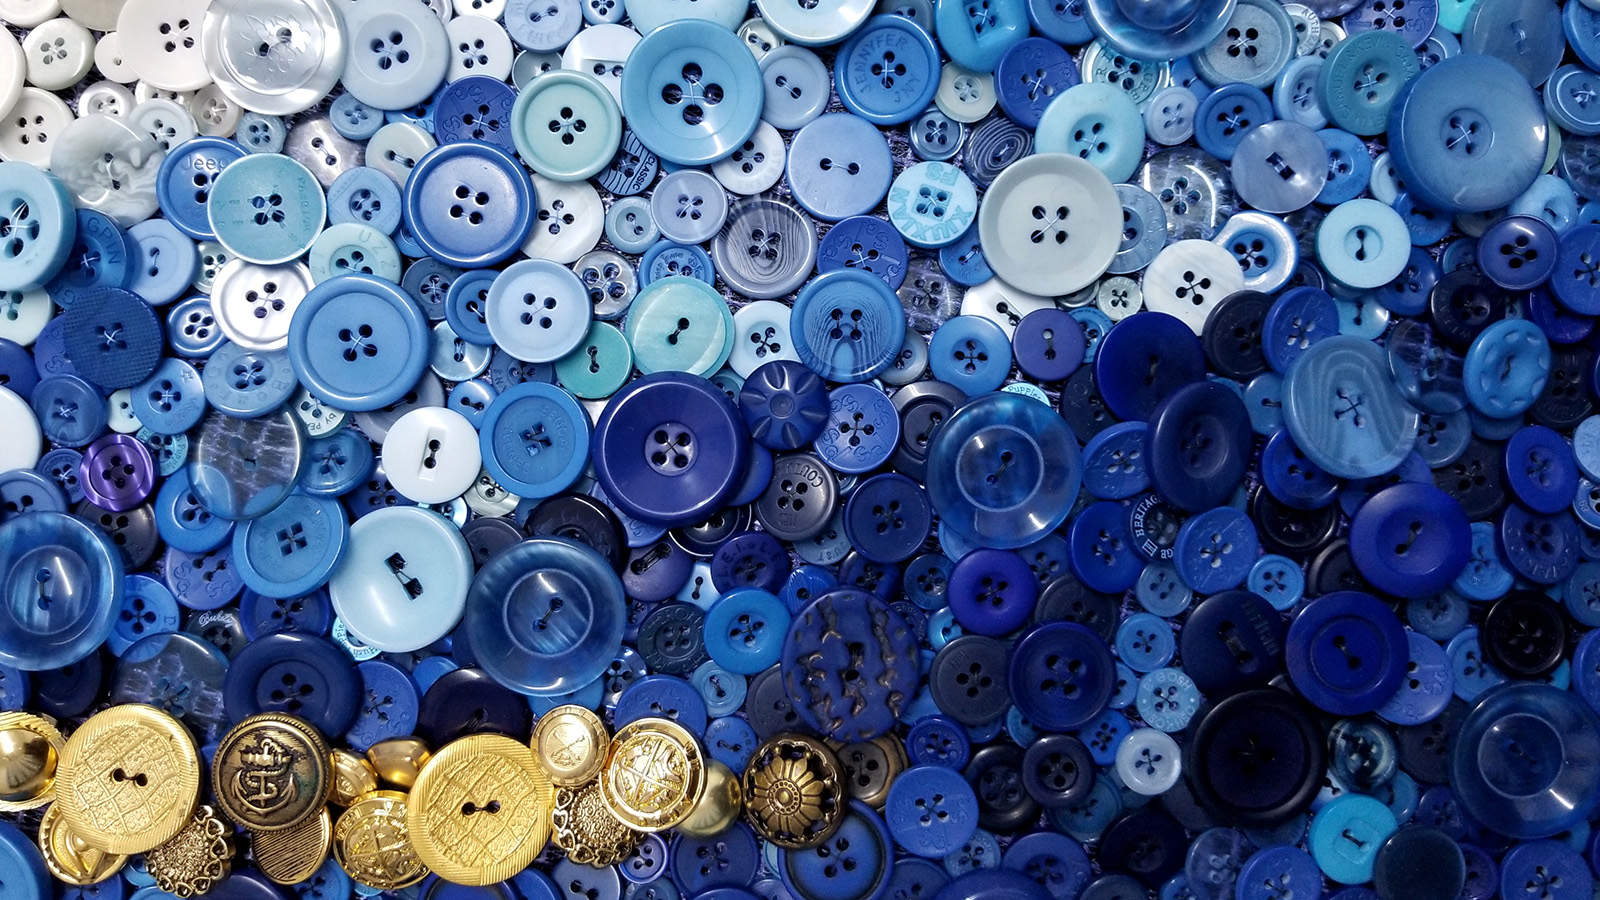 Circular buttons of various sizes in a descending blue gradient from white to navy. In the bottom lefthand corner is a clump of gilded golden circular buttons in various vintage styles